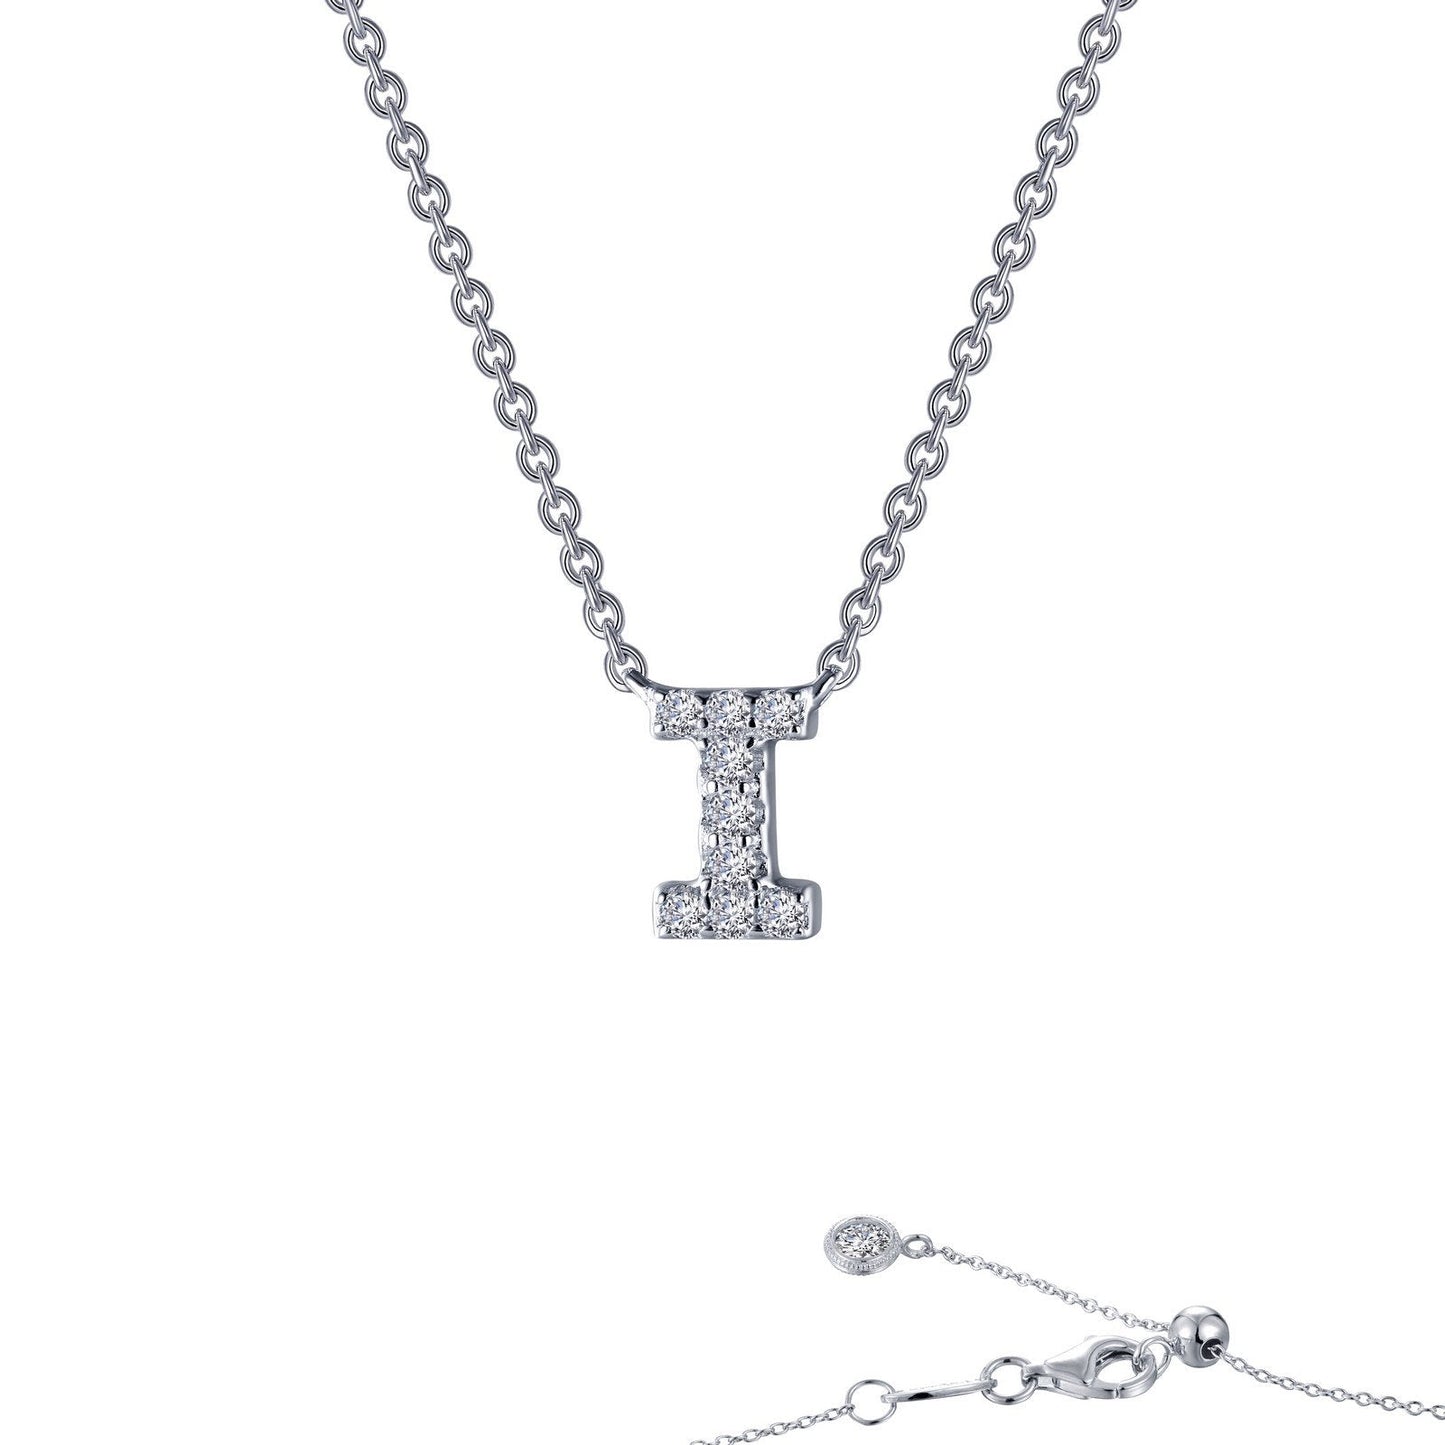 Lafonn Letter I Pendant Necklace Simulated Diamond NECKLACES Platinum 0.31 CTS Approx. 6.7mm (H) x 1.9mm (W)